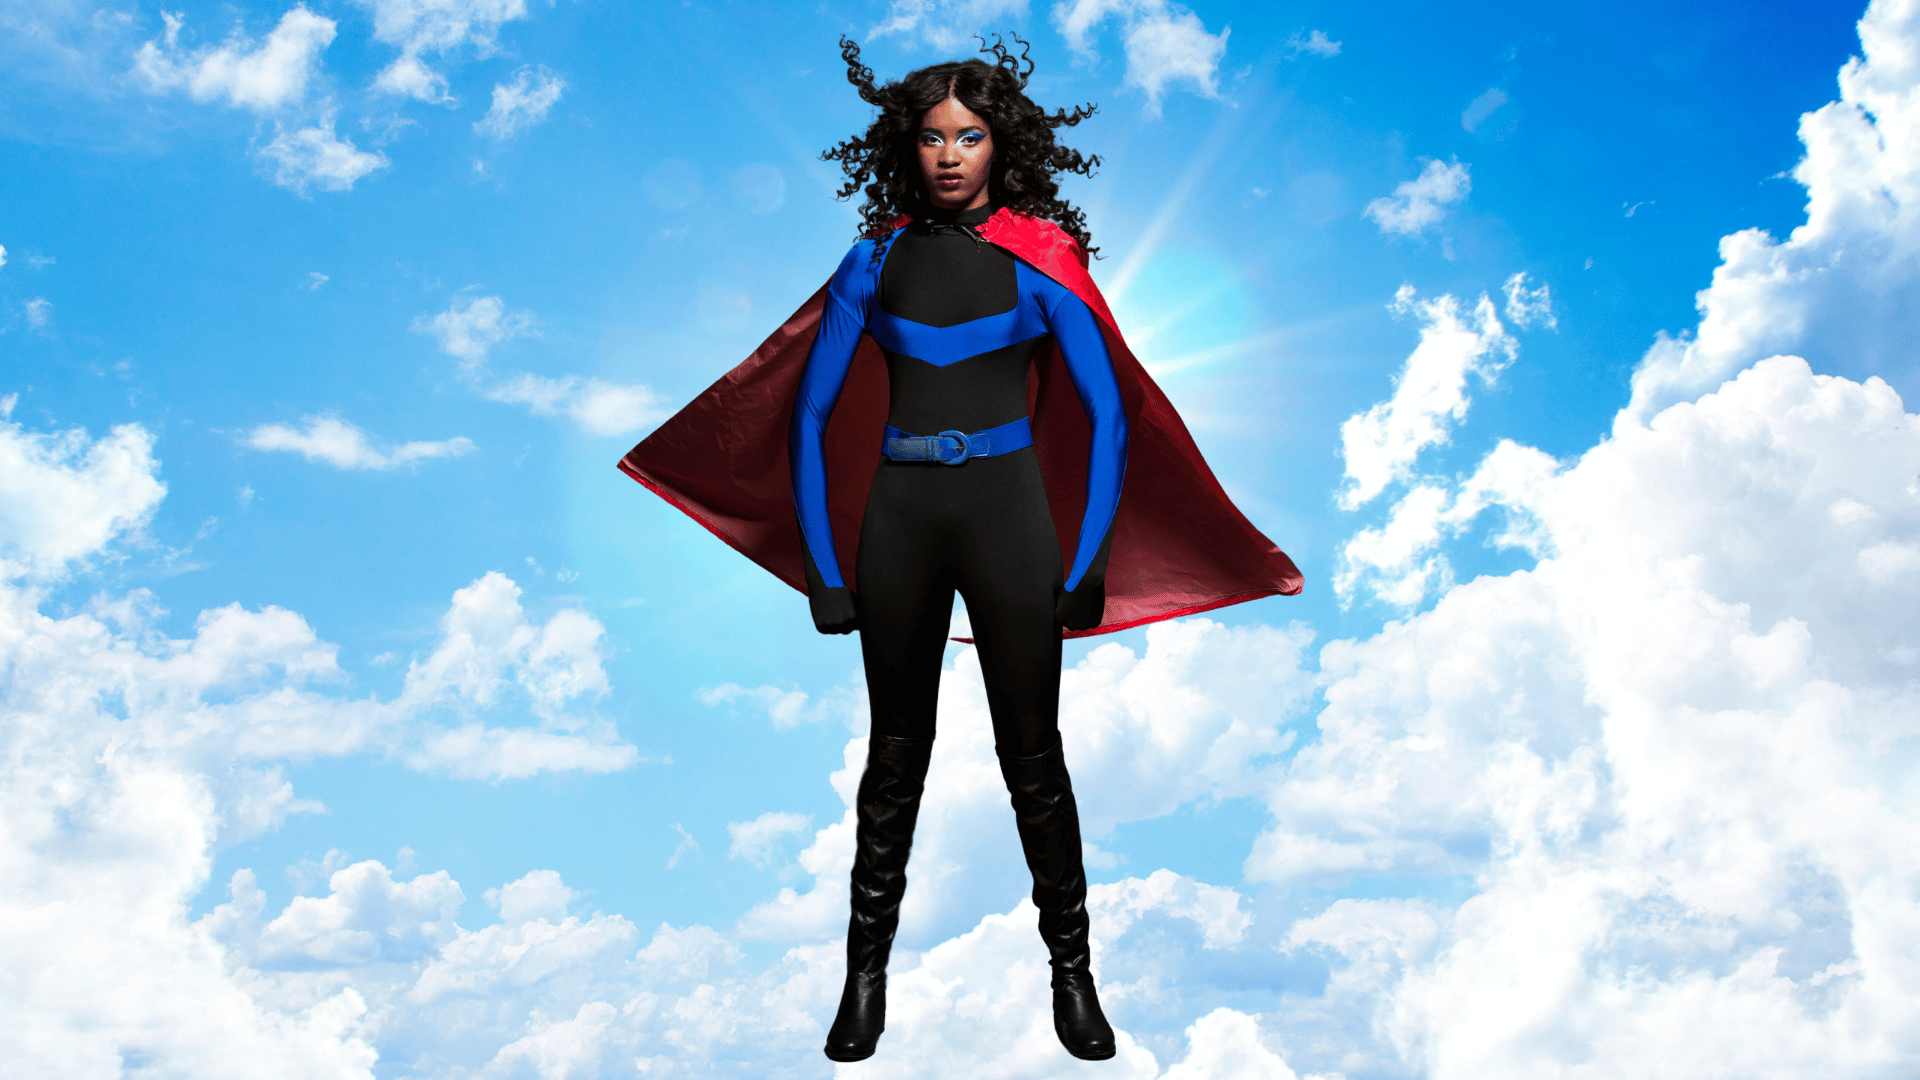 A Black woman, dressed in a superwoman costume, standing proud against a bright blue sky